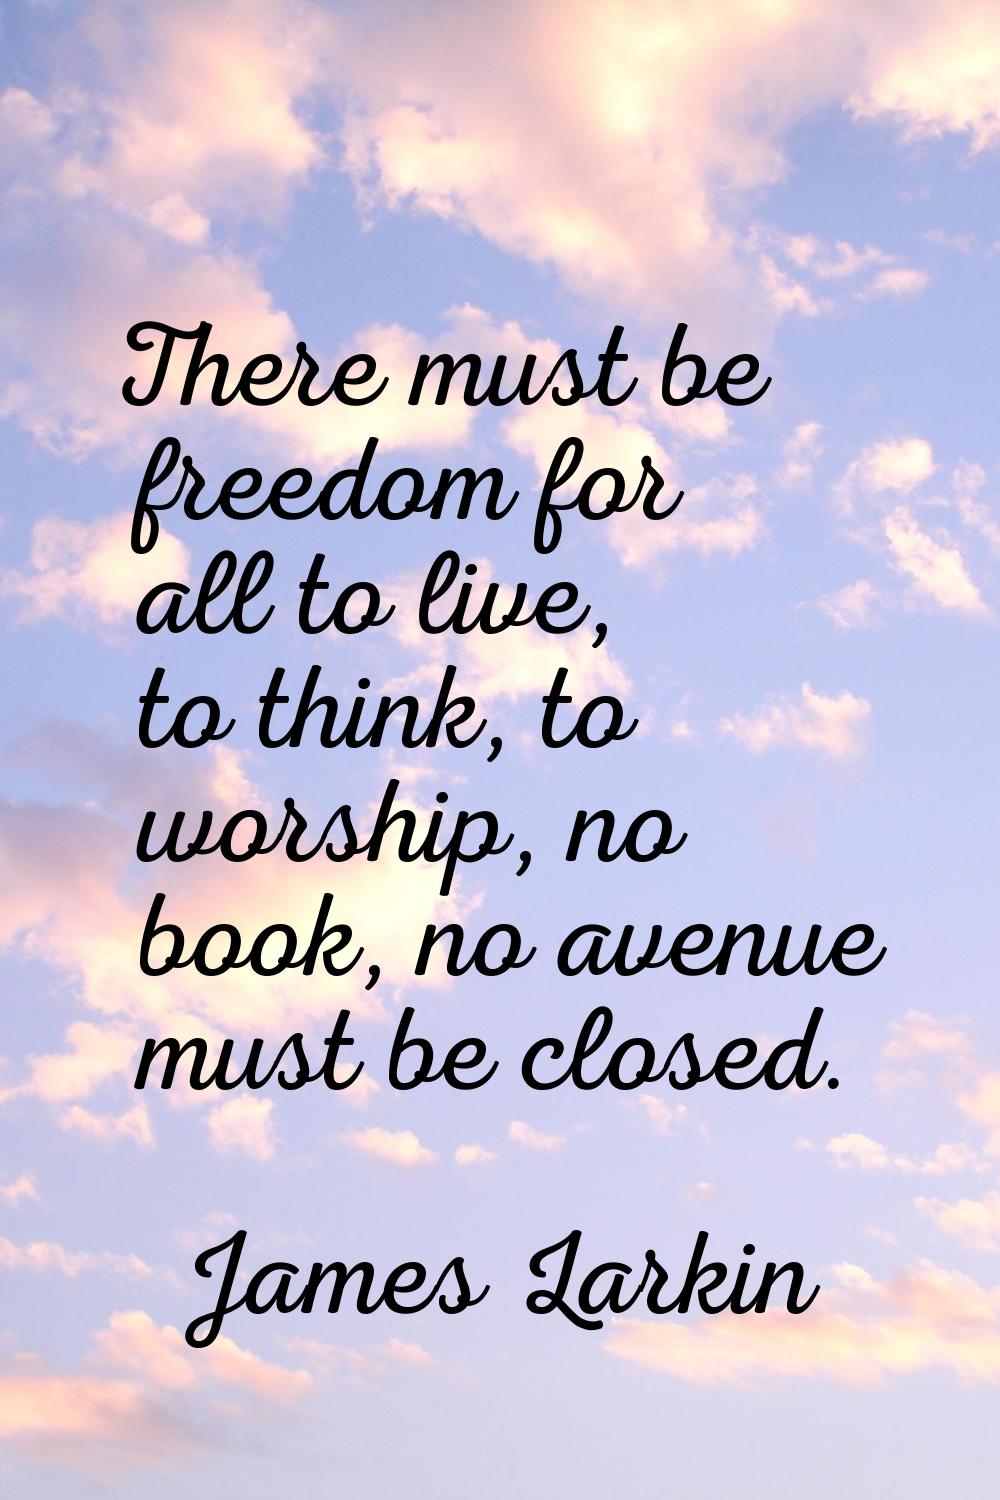 There must be freedom for all to live, to think, to worship, no book, no avenue must be closed.